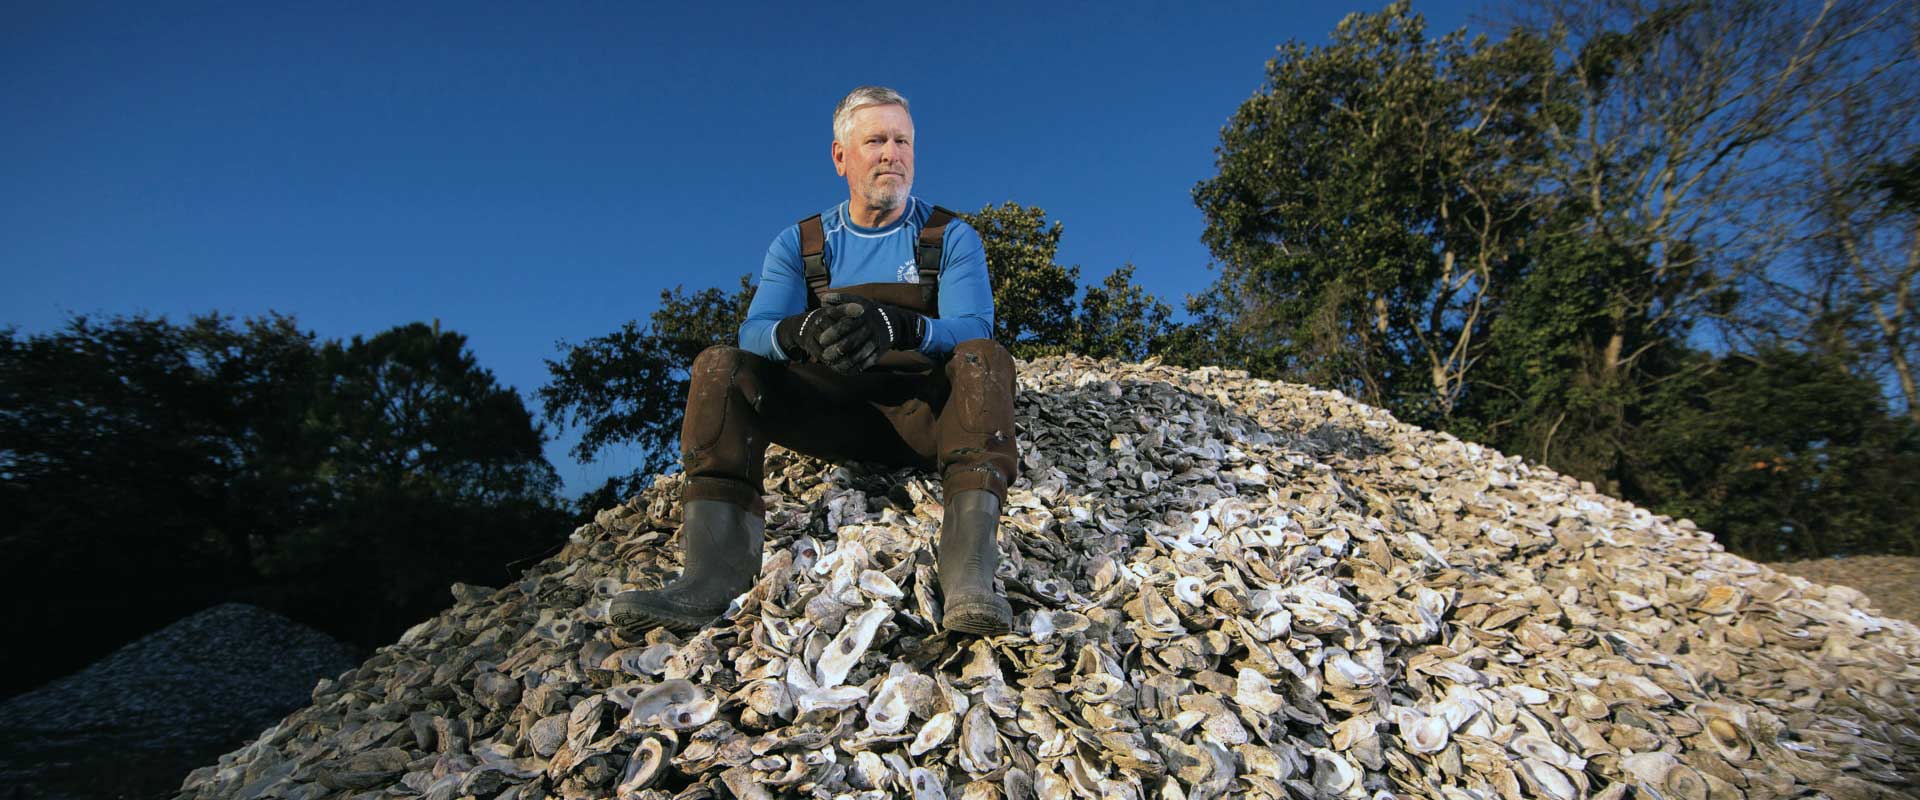 Duke Aquafarm founder Tom Schultz, an expert in marine molecular conservation, is working to understand climate’s impact on seafood such as oysters.